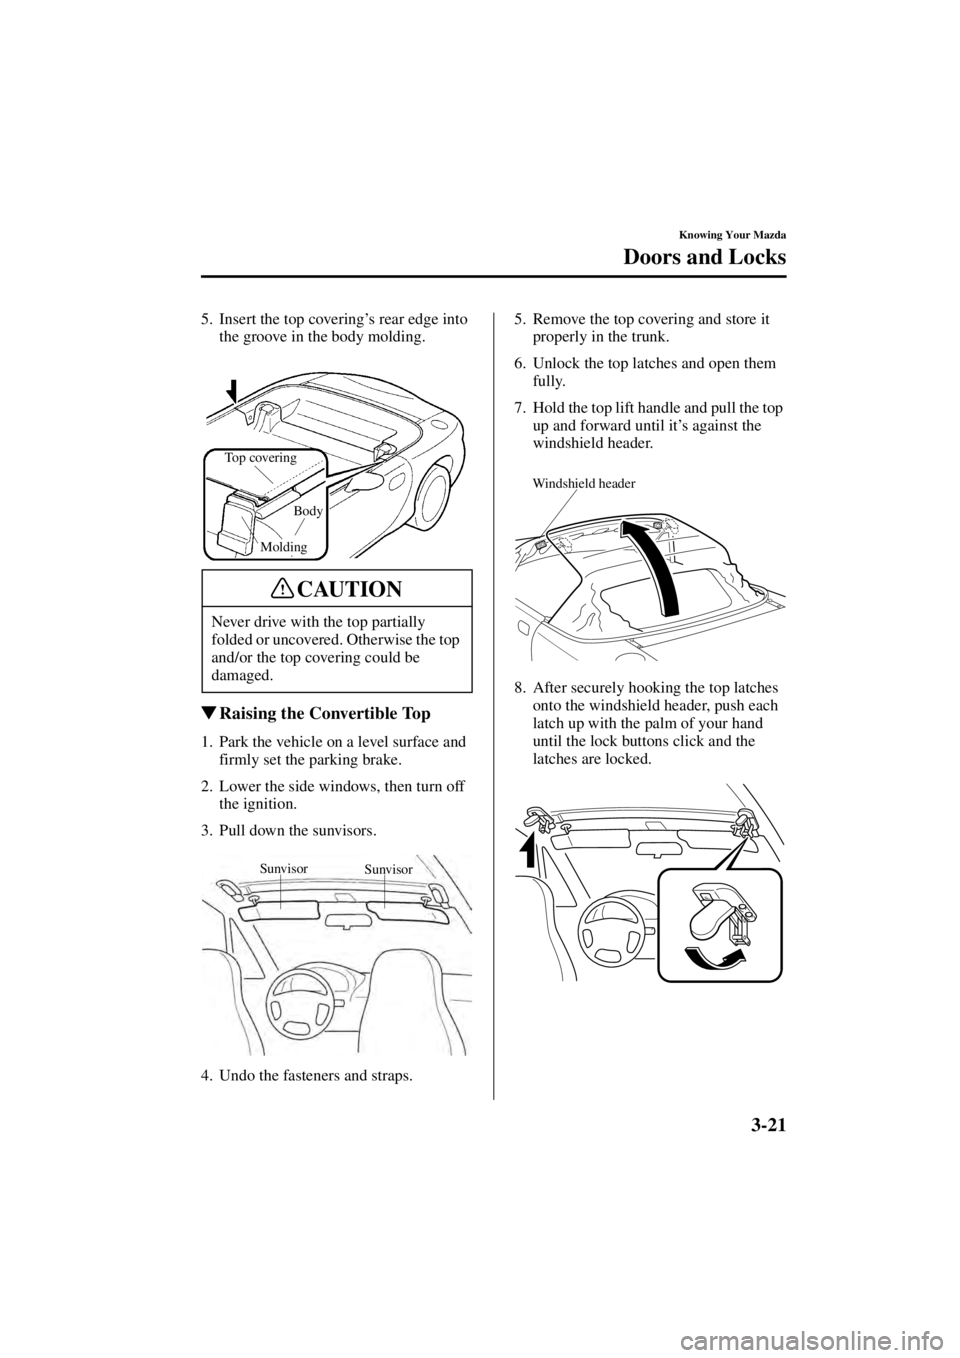 MAZDA MODEL SPEED MX-5 MIATA 2004 Workshop Manual 3-21
Knowing Your Mazda
Doors and Locks
Form No. 8T02-EA-03L
5. Insert the top covering’s rear edge into 
the groove in the body molding.
 Raising the Convertible Top
1. Park the vehicle on a level